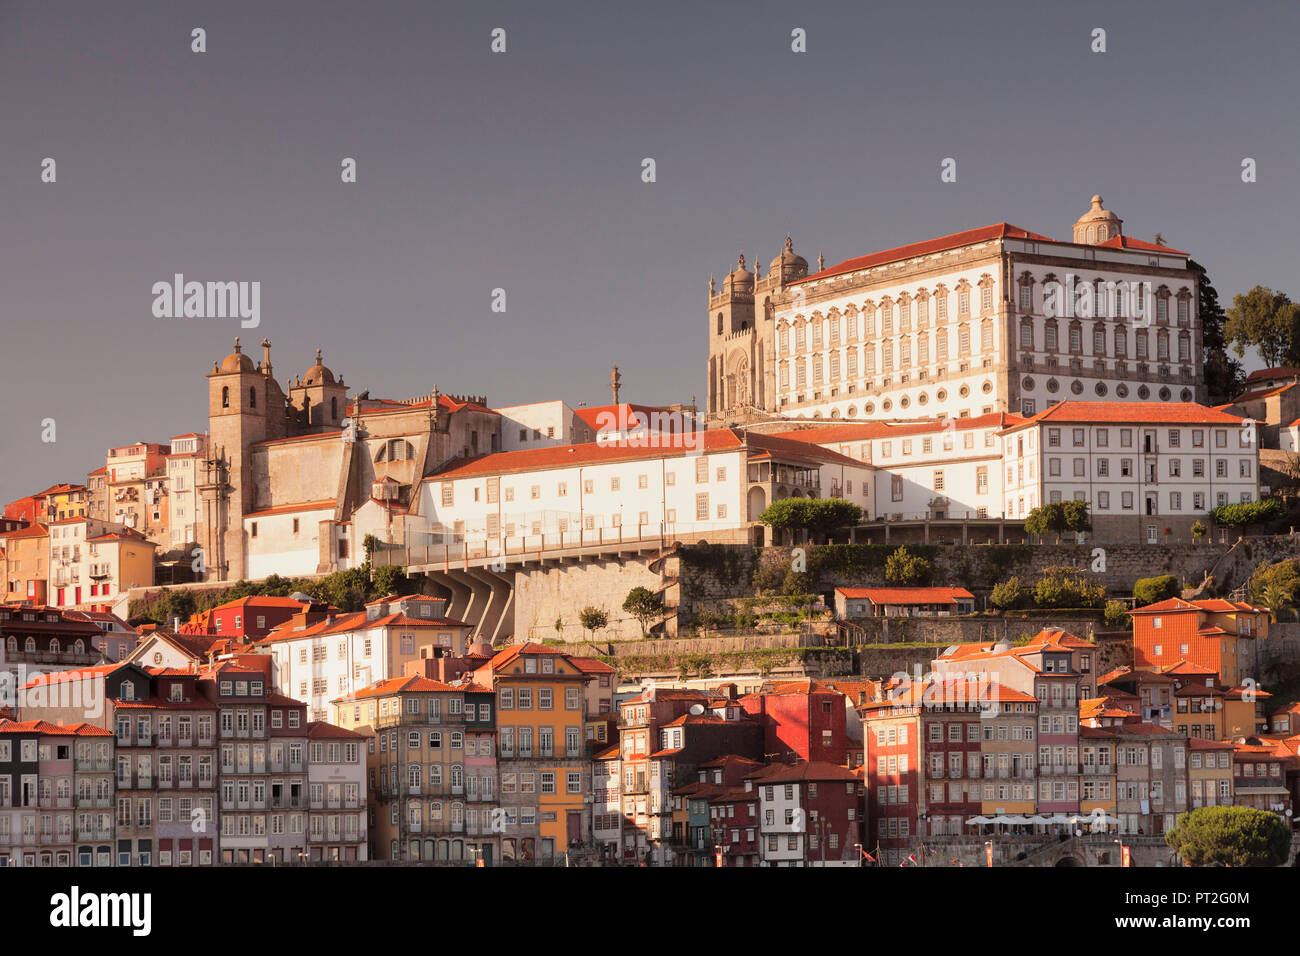 Ribeira Old Town, UNESCO World Heritage Site, Episcopal Palace and Se Cathedral, Porto, Norte Region, Portugal Stock Photo